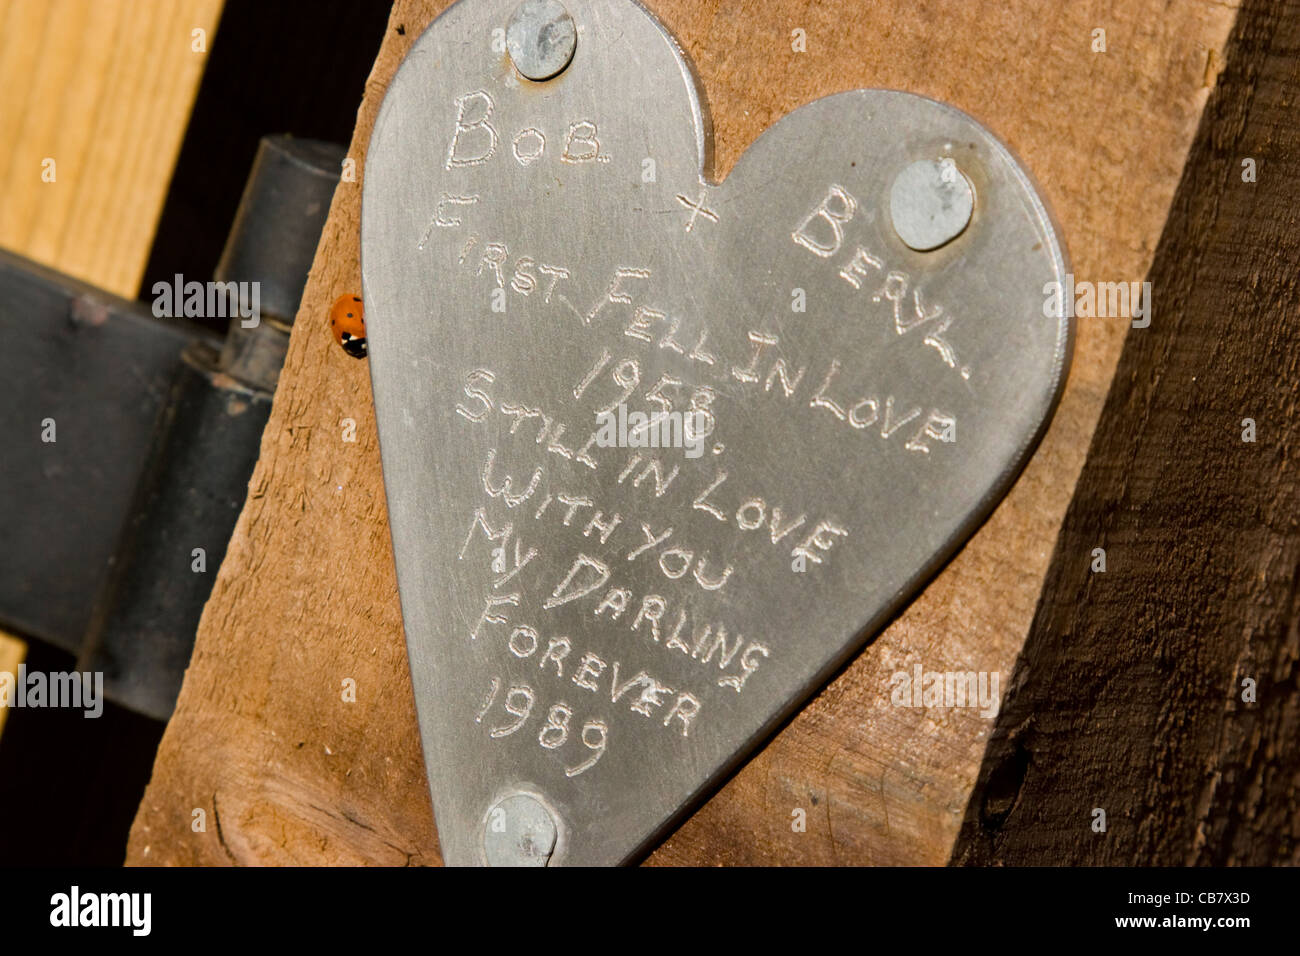 A Personal Message Of Love Engraved On A Heart Shaped Plaque Fixed To A Footpath Gate Post Stock Photo